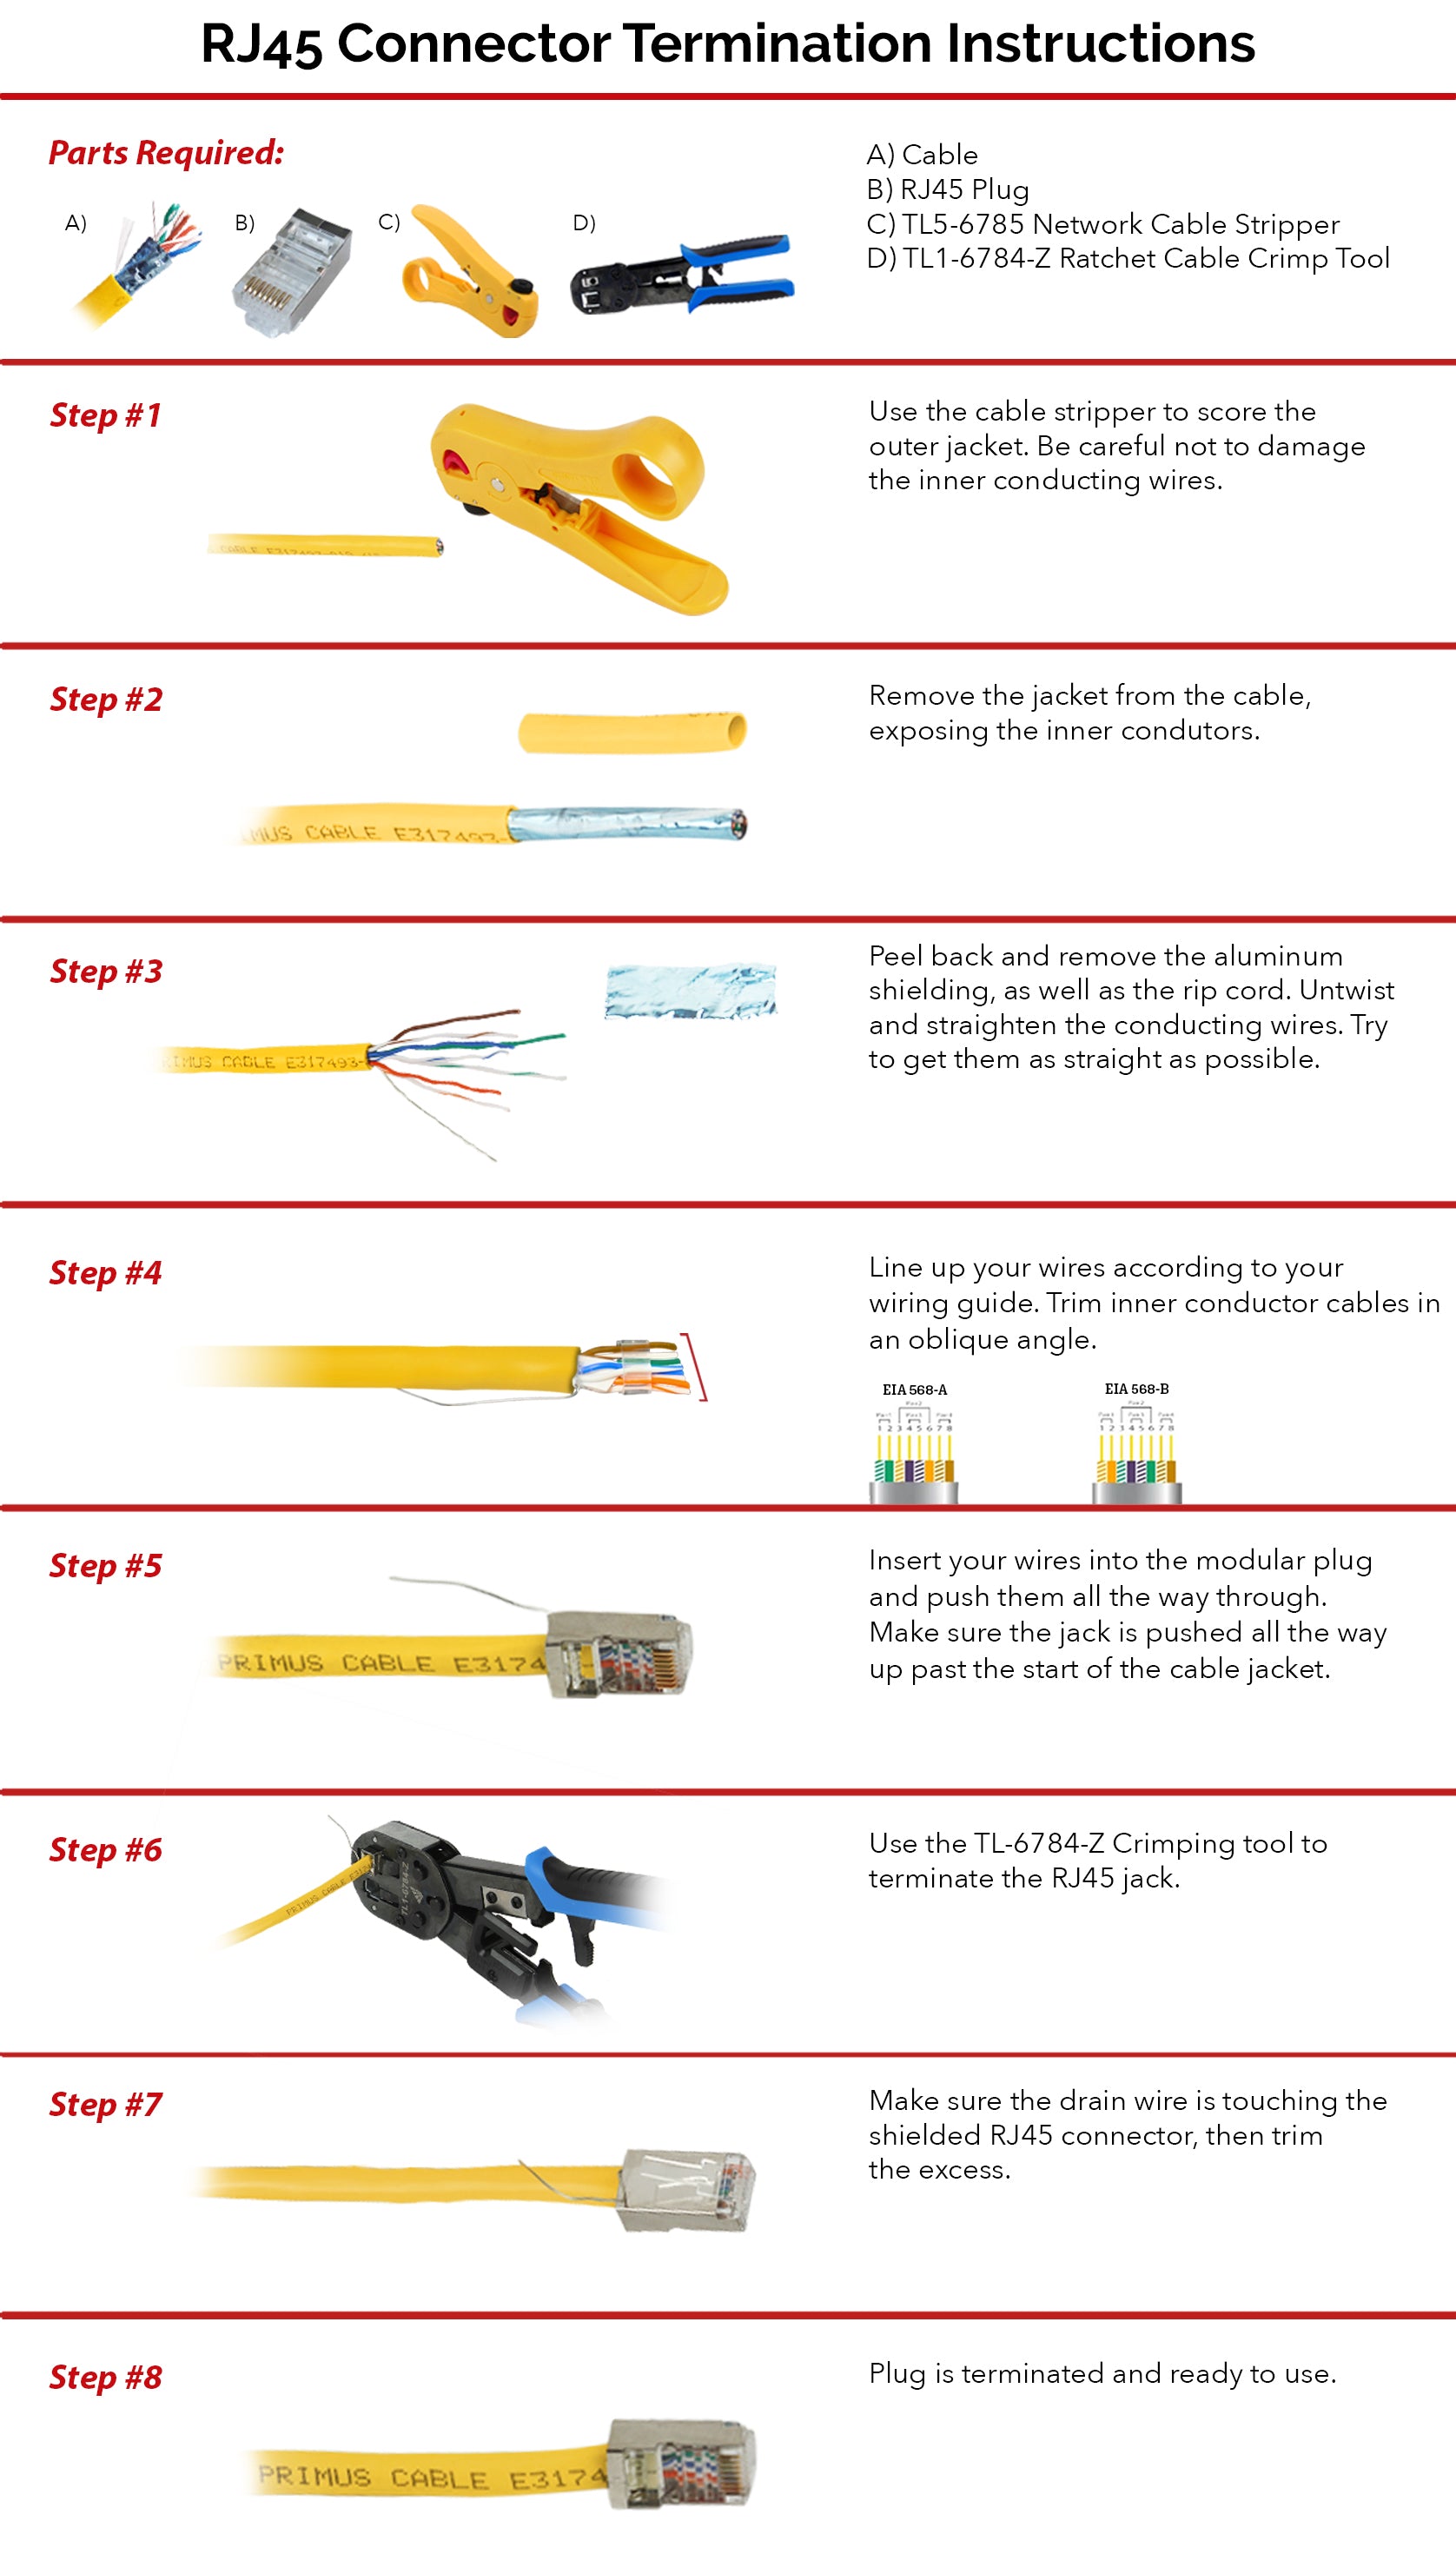 How to make RJ45 cable - Inst Tools